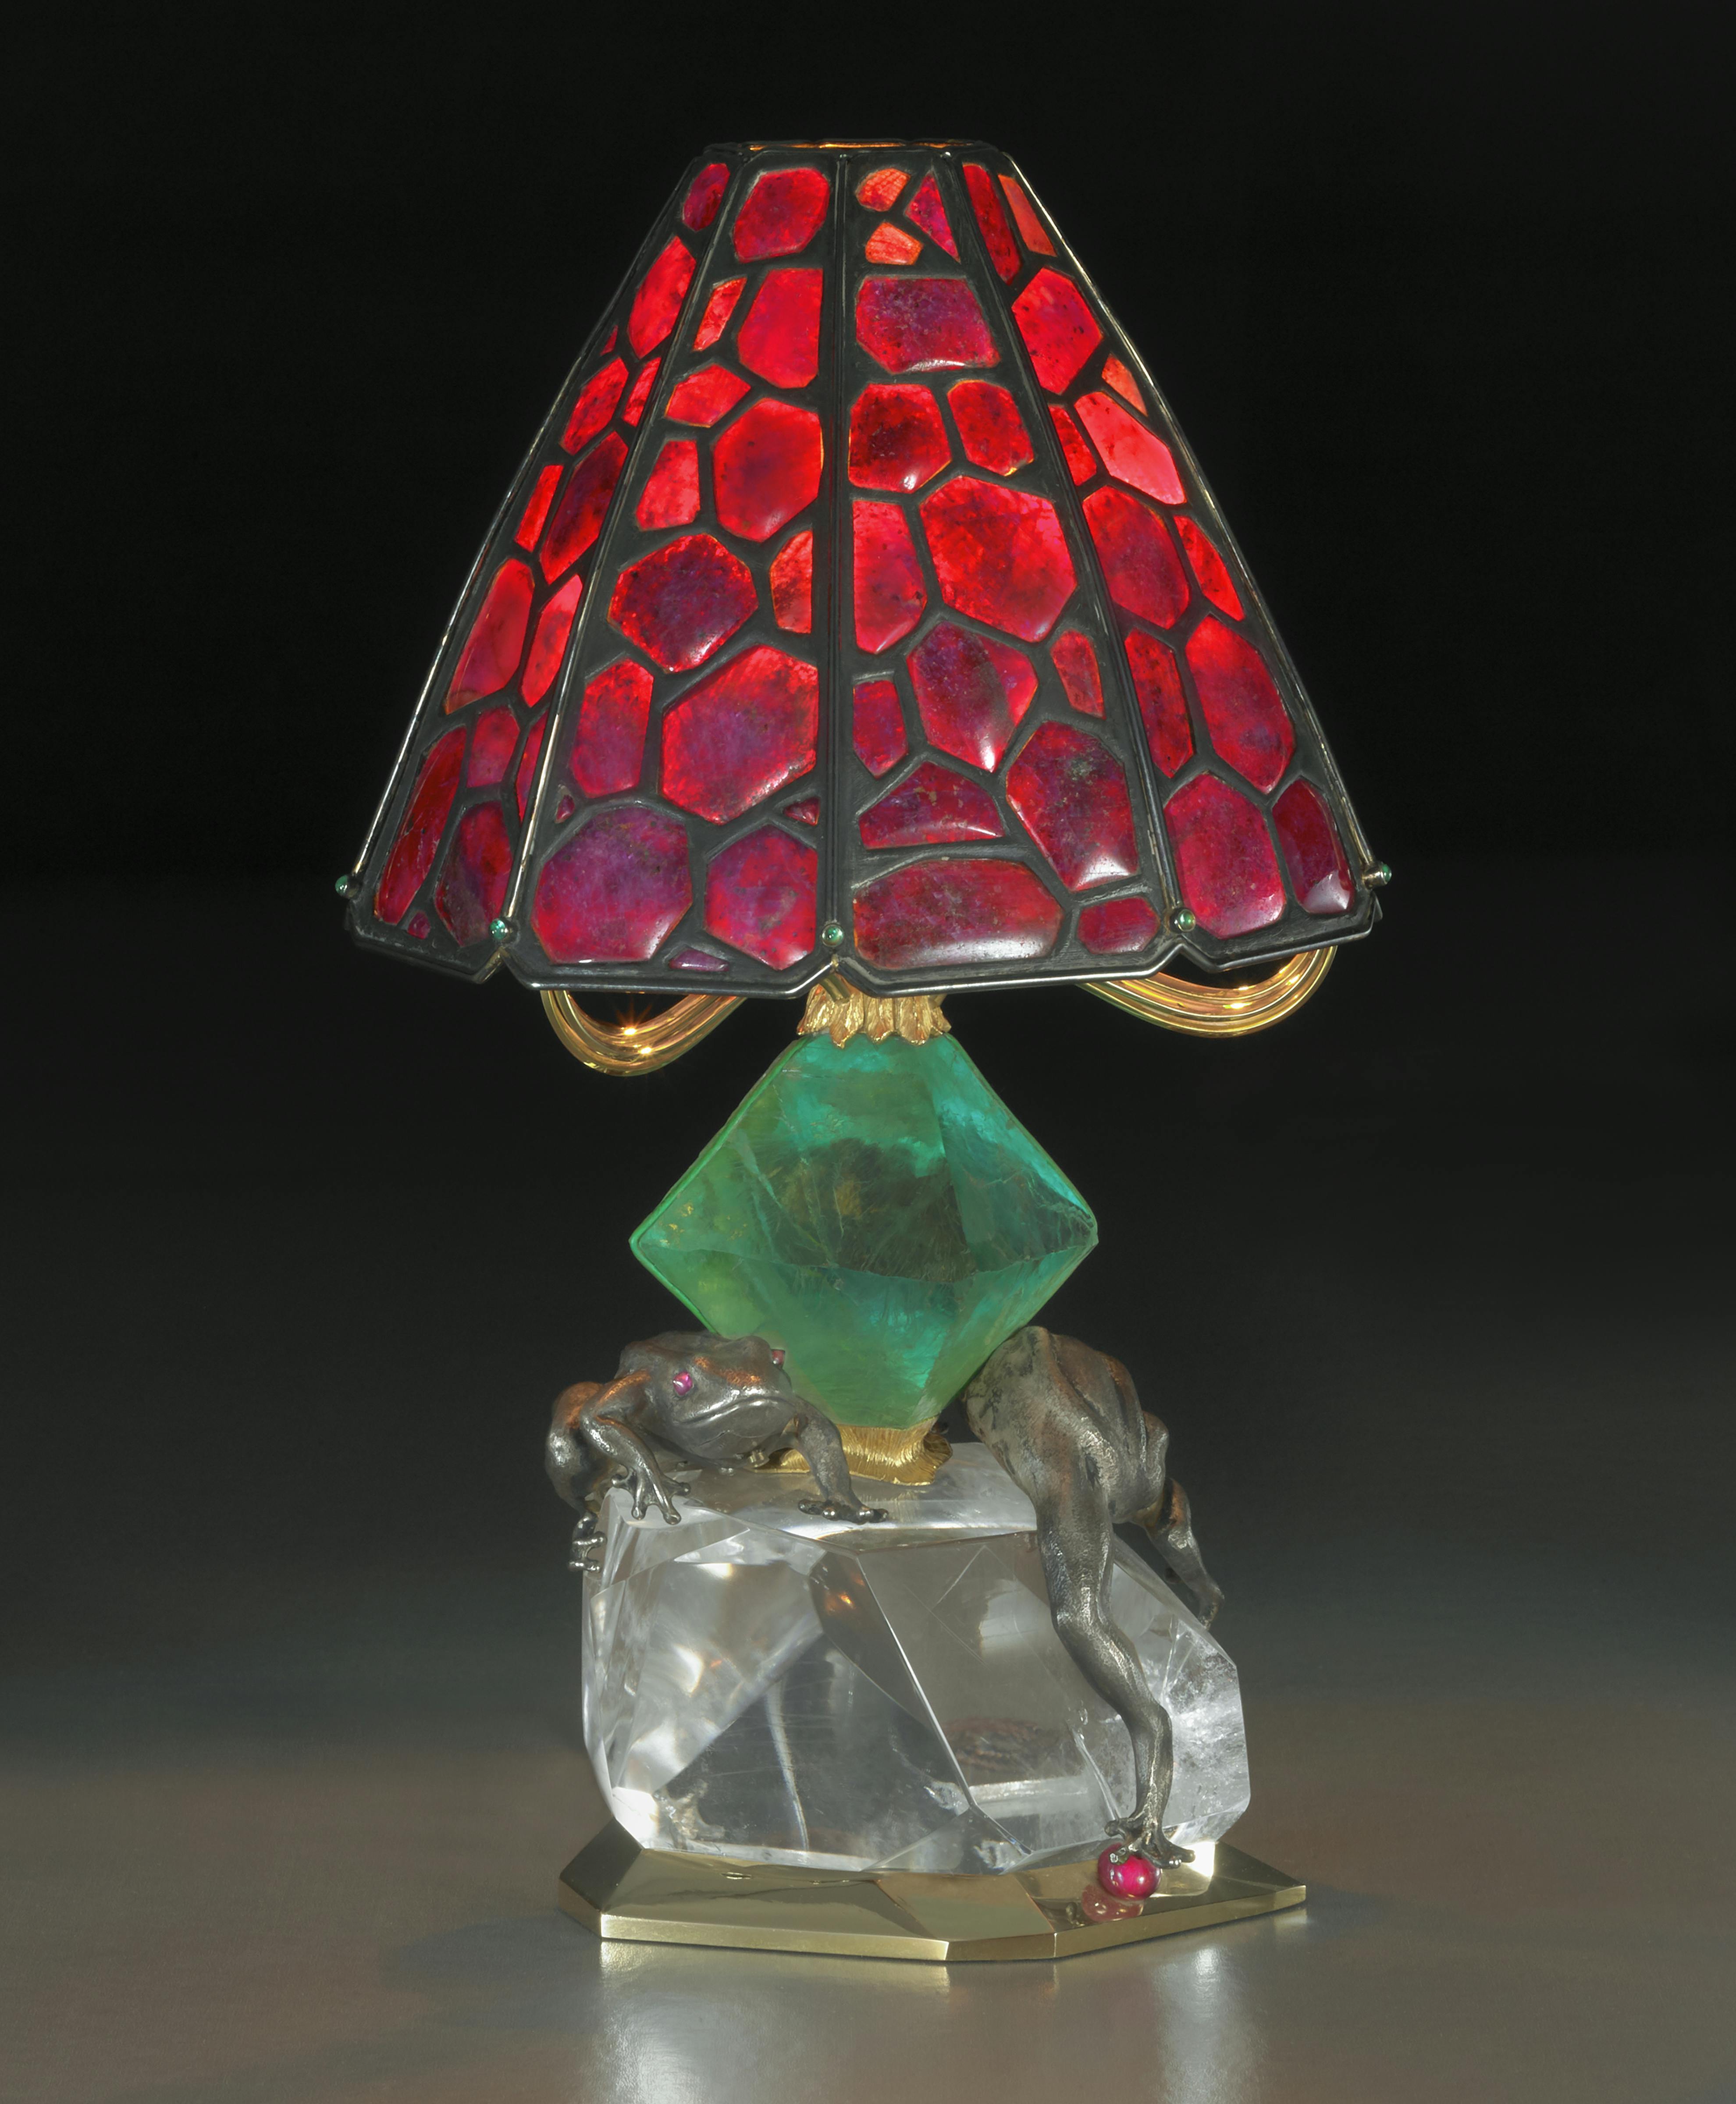 Tiffany Studios Lamps Overview: History, Styles & More